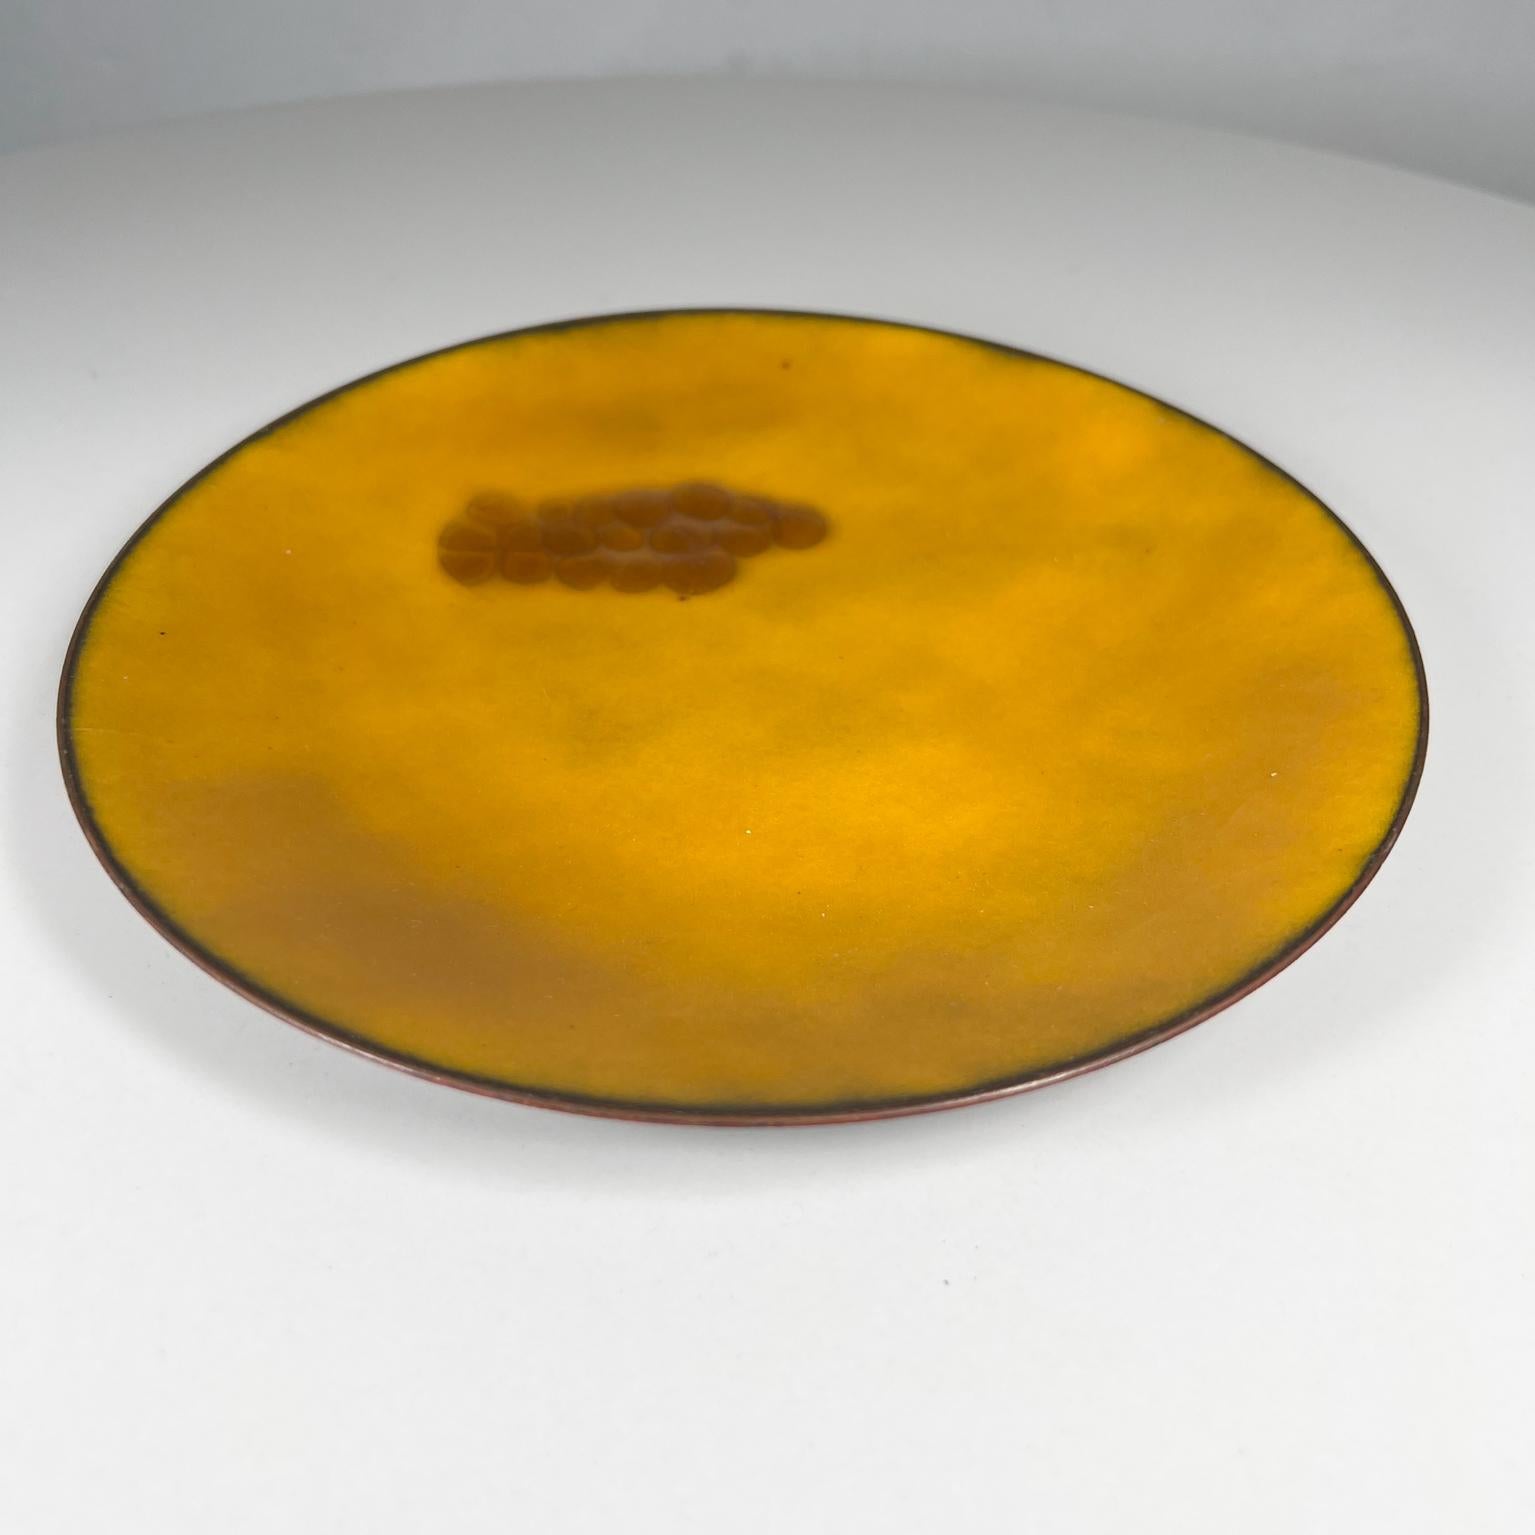 1960s Hildegard abstract modernist art yellow copper enamel plate with Grapes 
Signed art Hildegard.
Measures: 7.75 diameter x .75 d
Preowned original vintage condition
Refer to images.